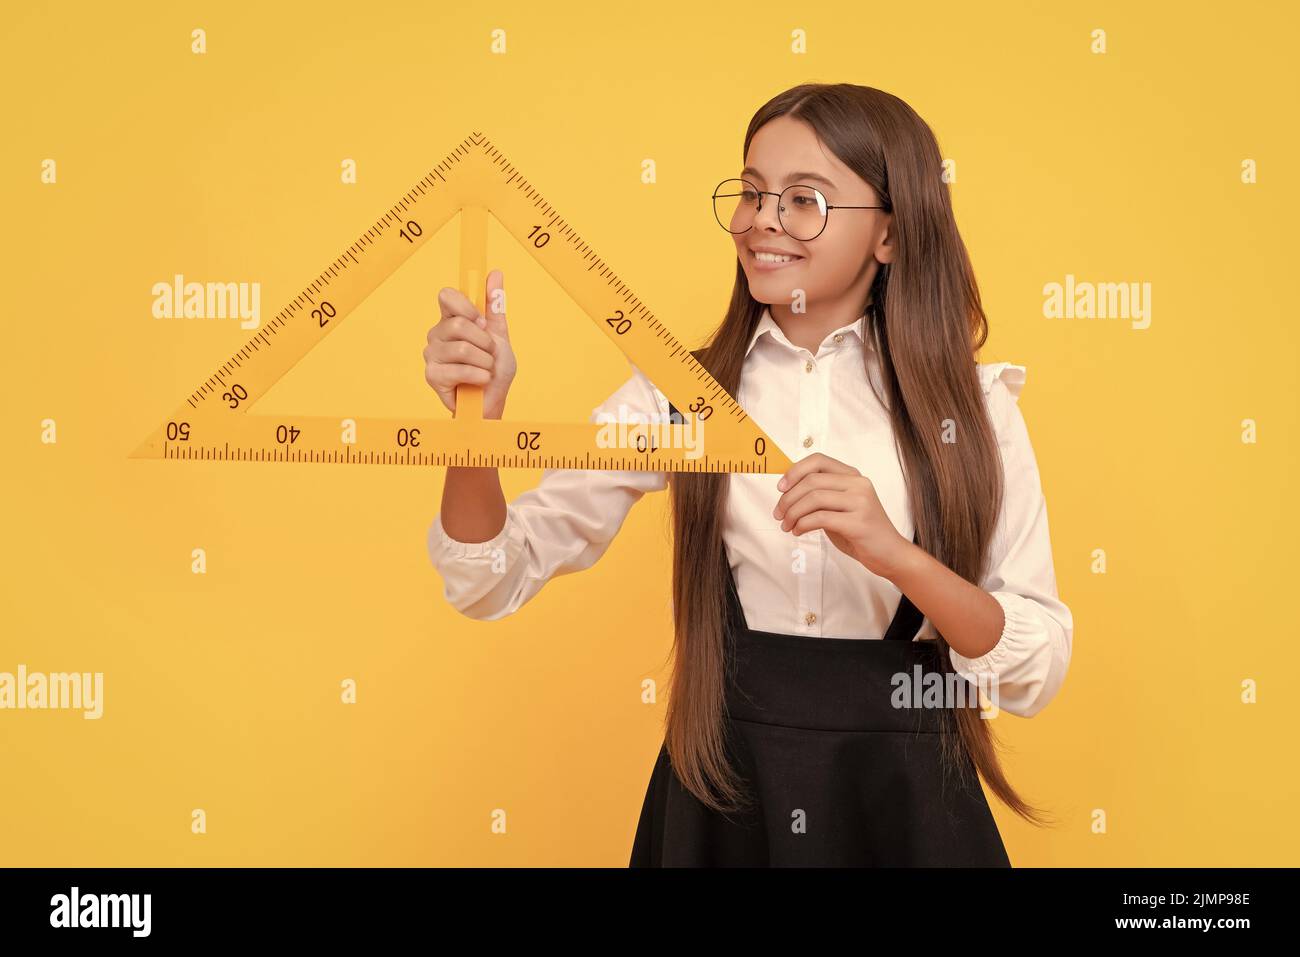 Rullers for mathematics and geometry in school Stock Photo by ©alexcrysman  68325263